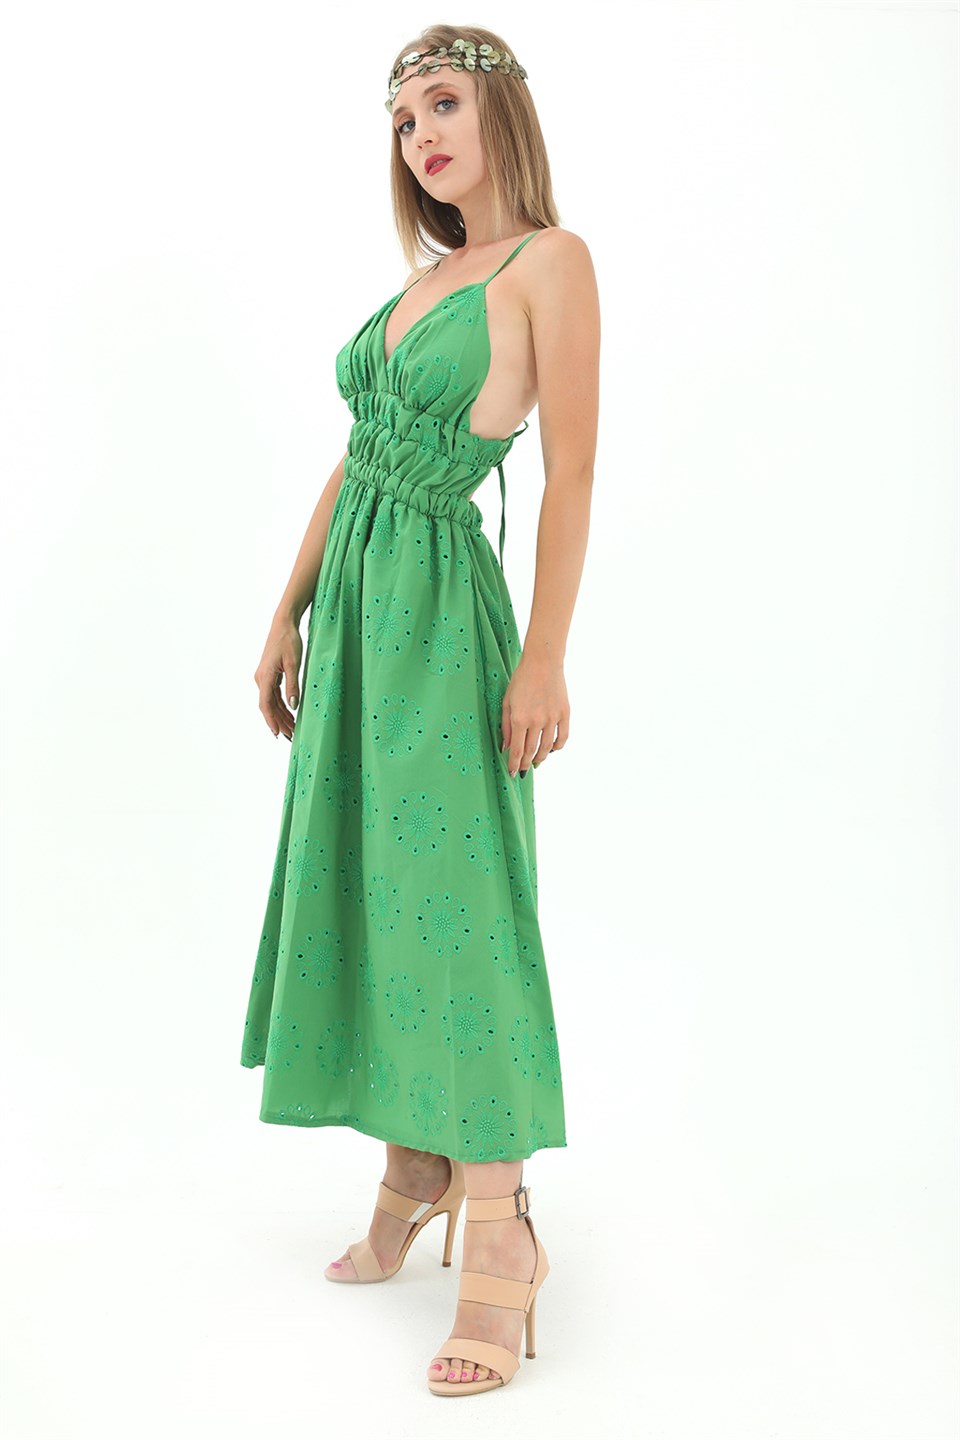 Women's Elastic Waist Lined Back Low-cut Embroidered Dress - Green - STREETMODE™